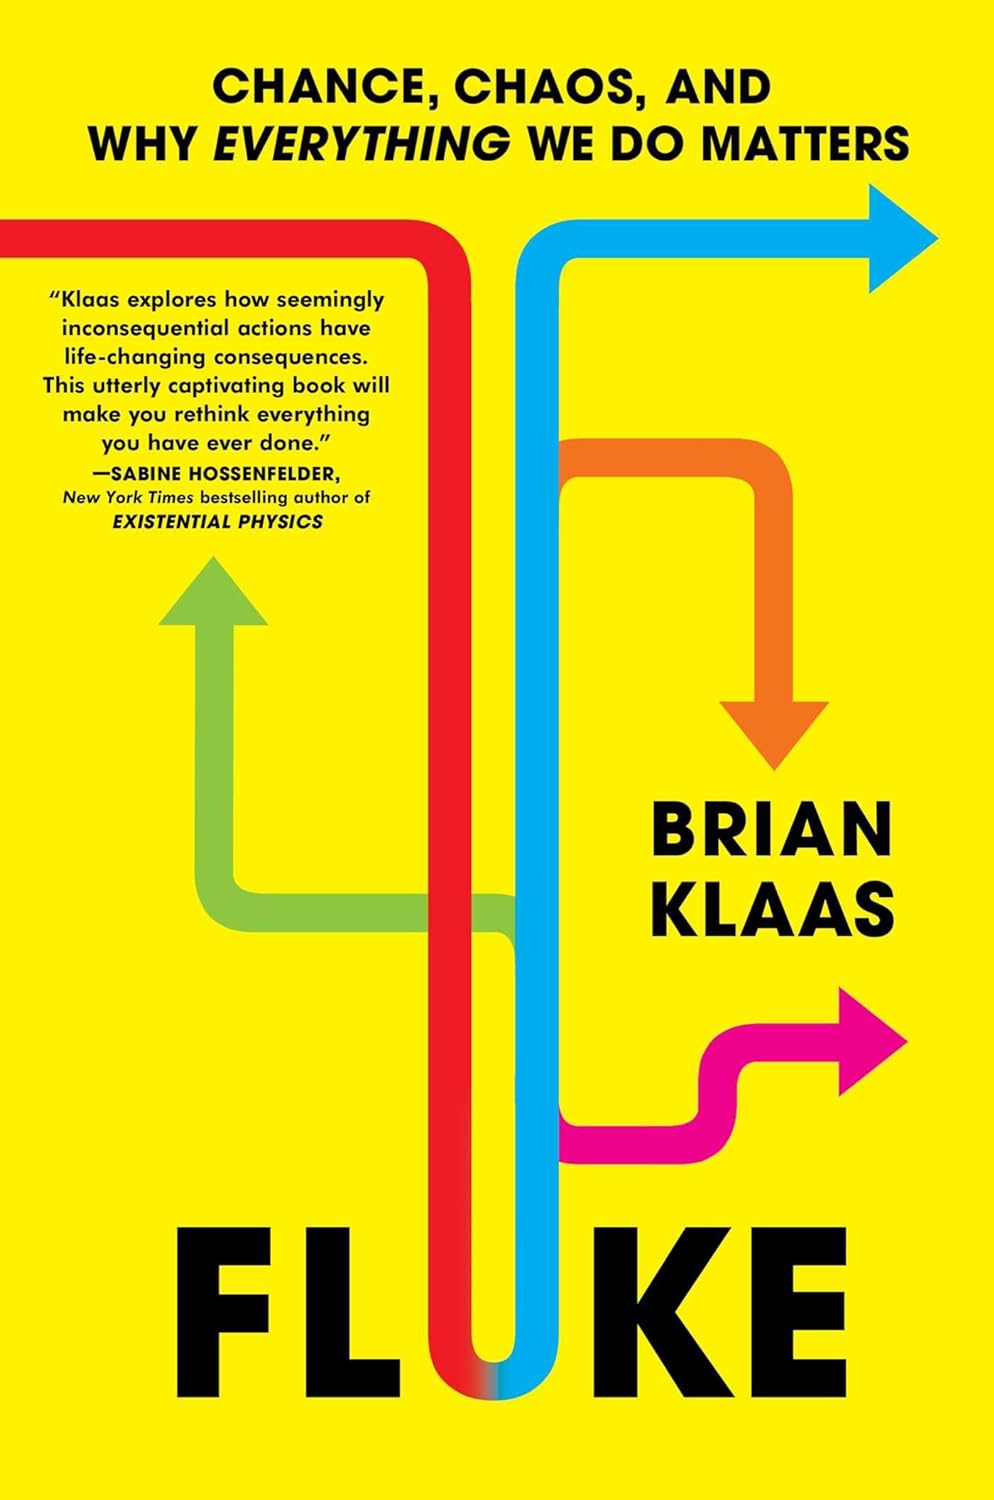 Fluke: Chance, Chaos, and Why Everything We Do Matters by Brian Klaas https://amzn.to/4b9ff2e Want to know what chaos theory can teach us about human events? In the perspective-altering tradition of […]